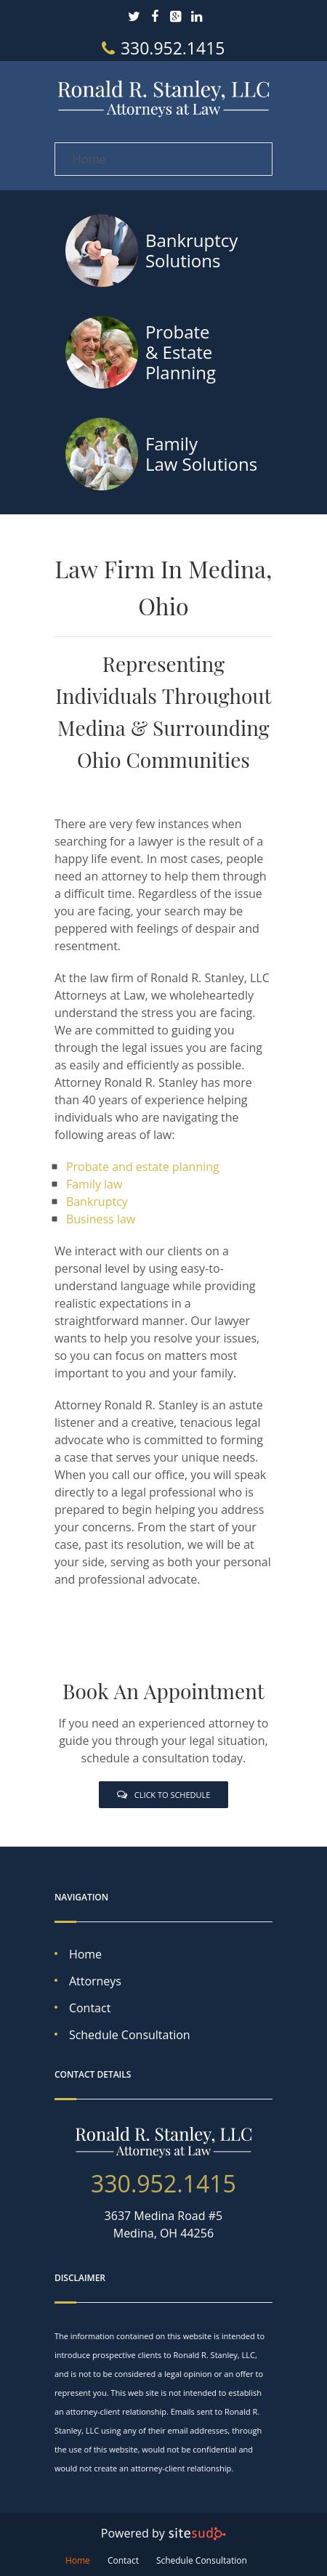 Ronald R. Stanley Attorneys at Law LLC - Medina OH Lawyers